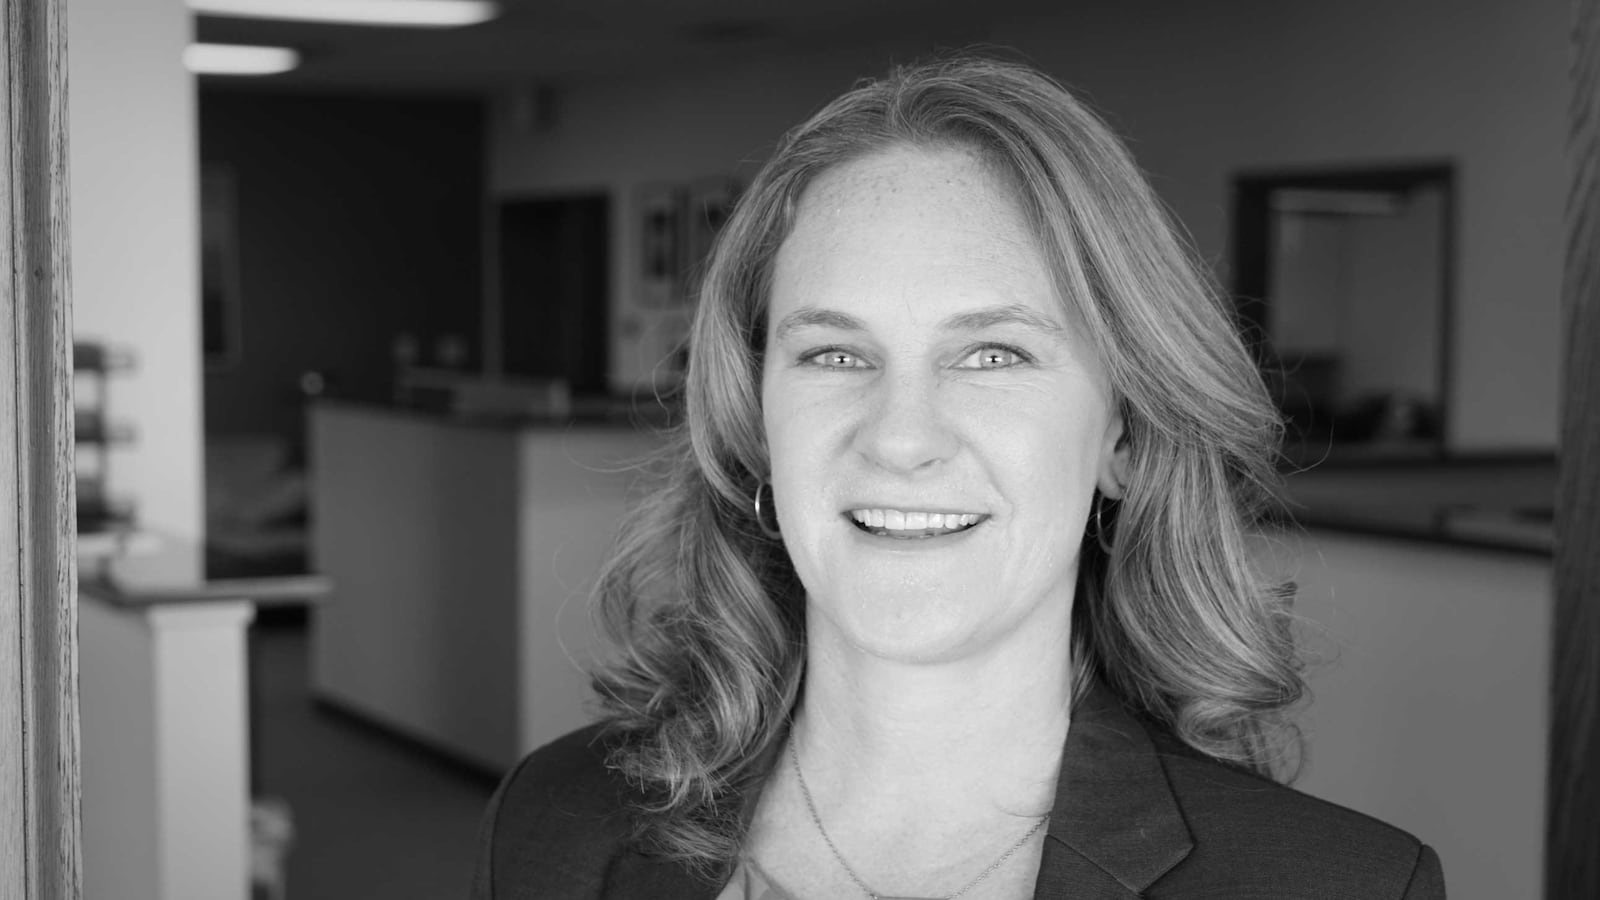 Krista Spurgin has been named Executive Director of Stand for Children Colorado. (Photo courtesy of Stand for Children)